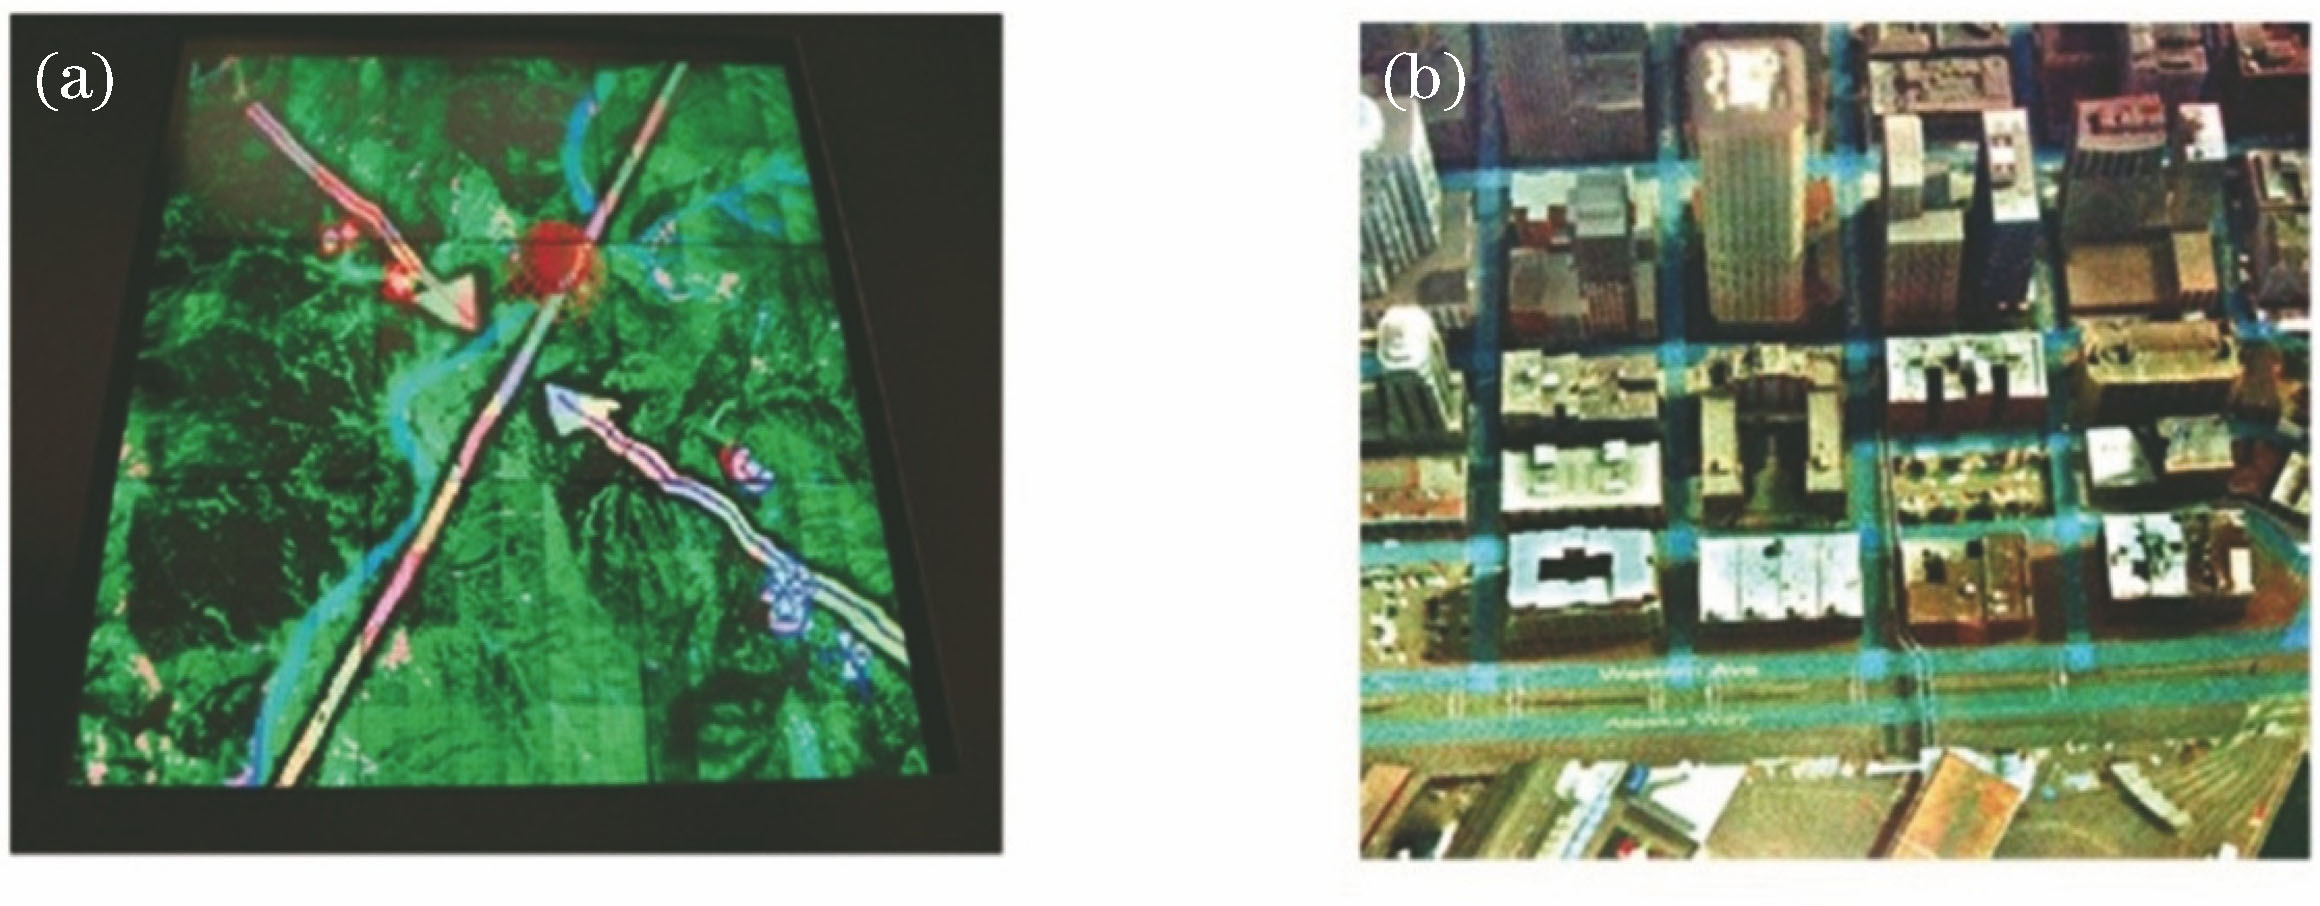 3D map of Zebra Imaging. (a) Holographic map of battlefield environment; (b) holographic map of New York city